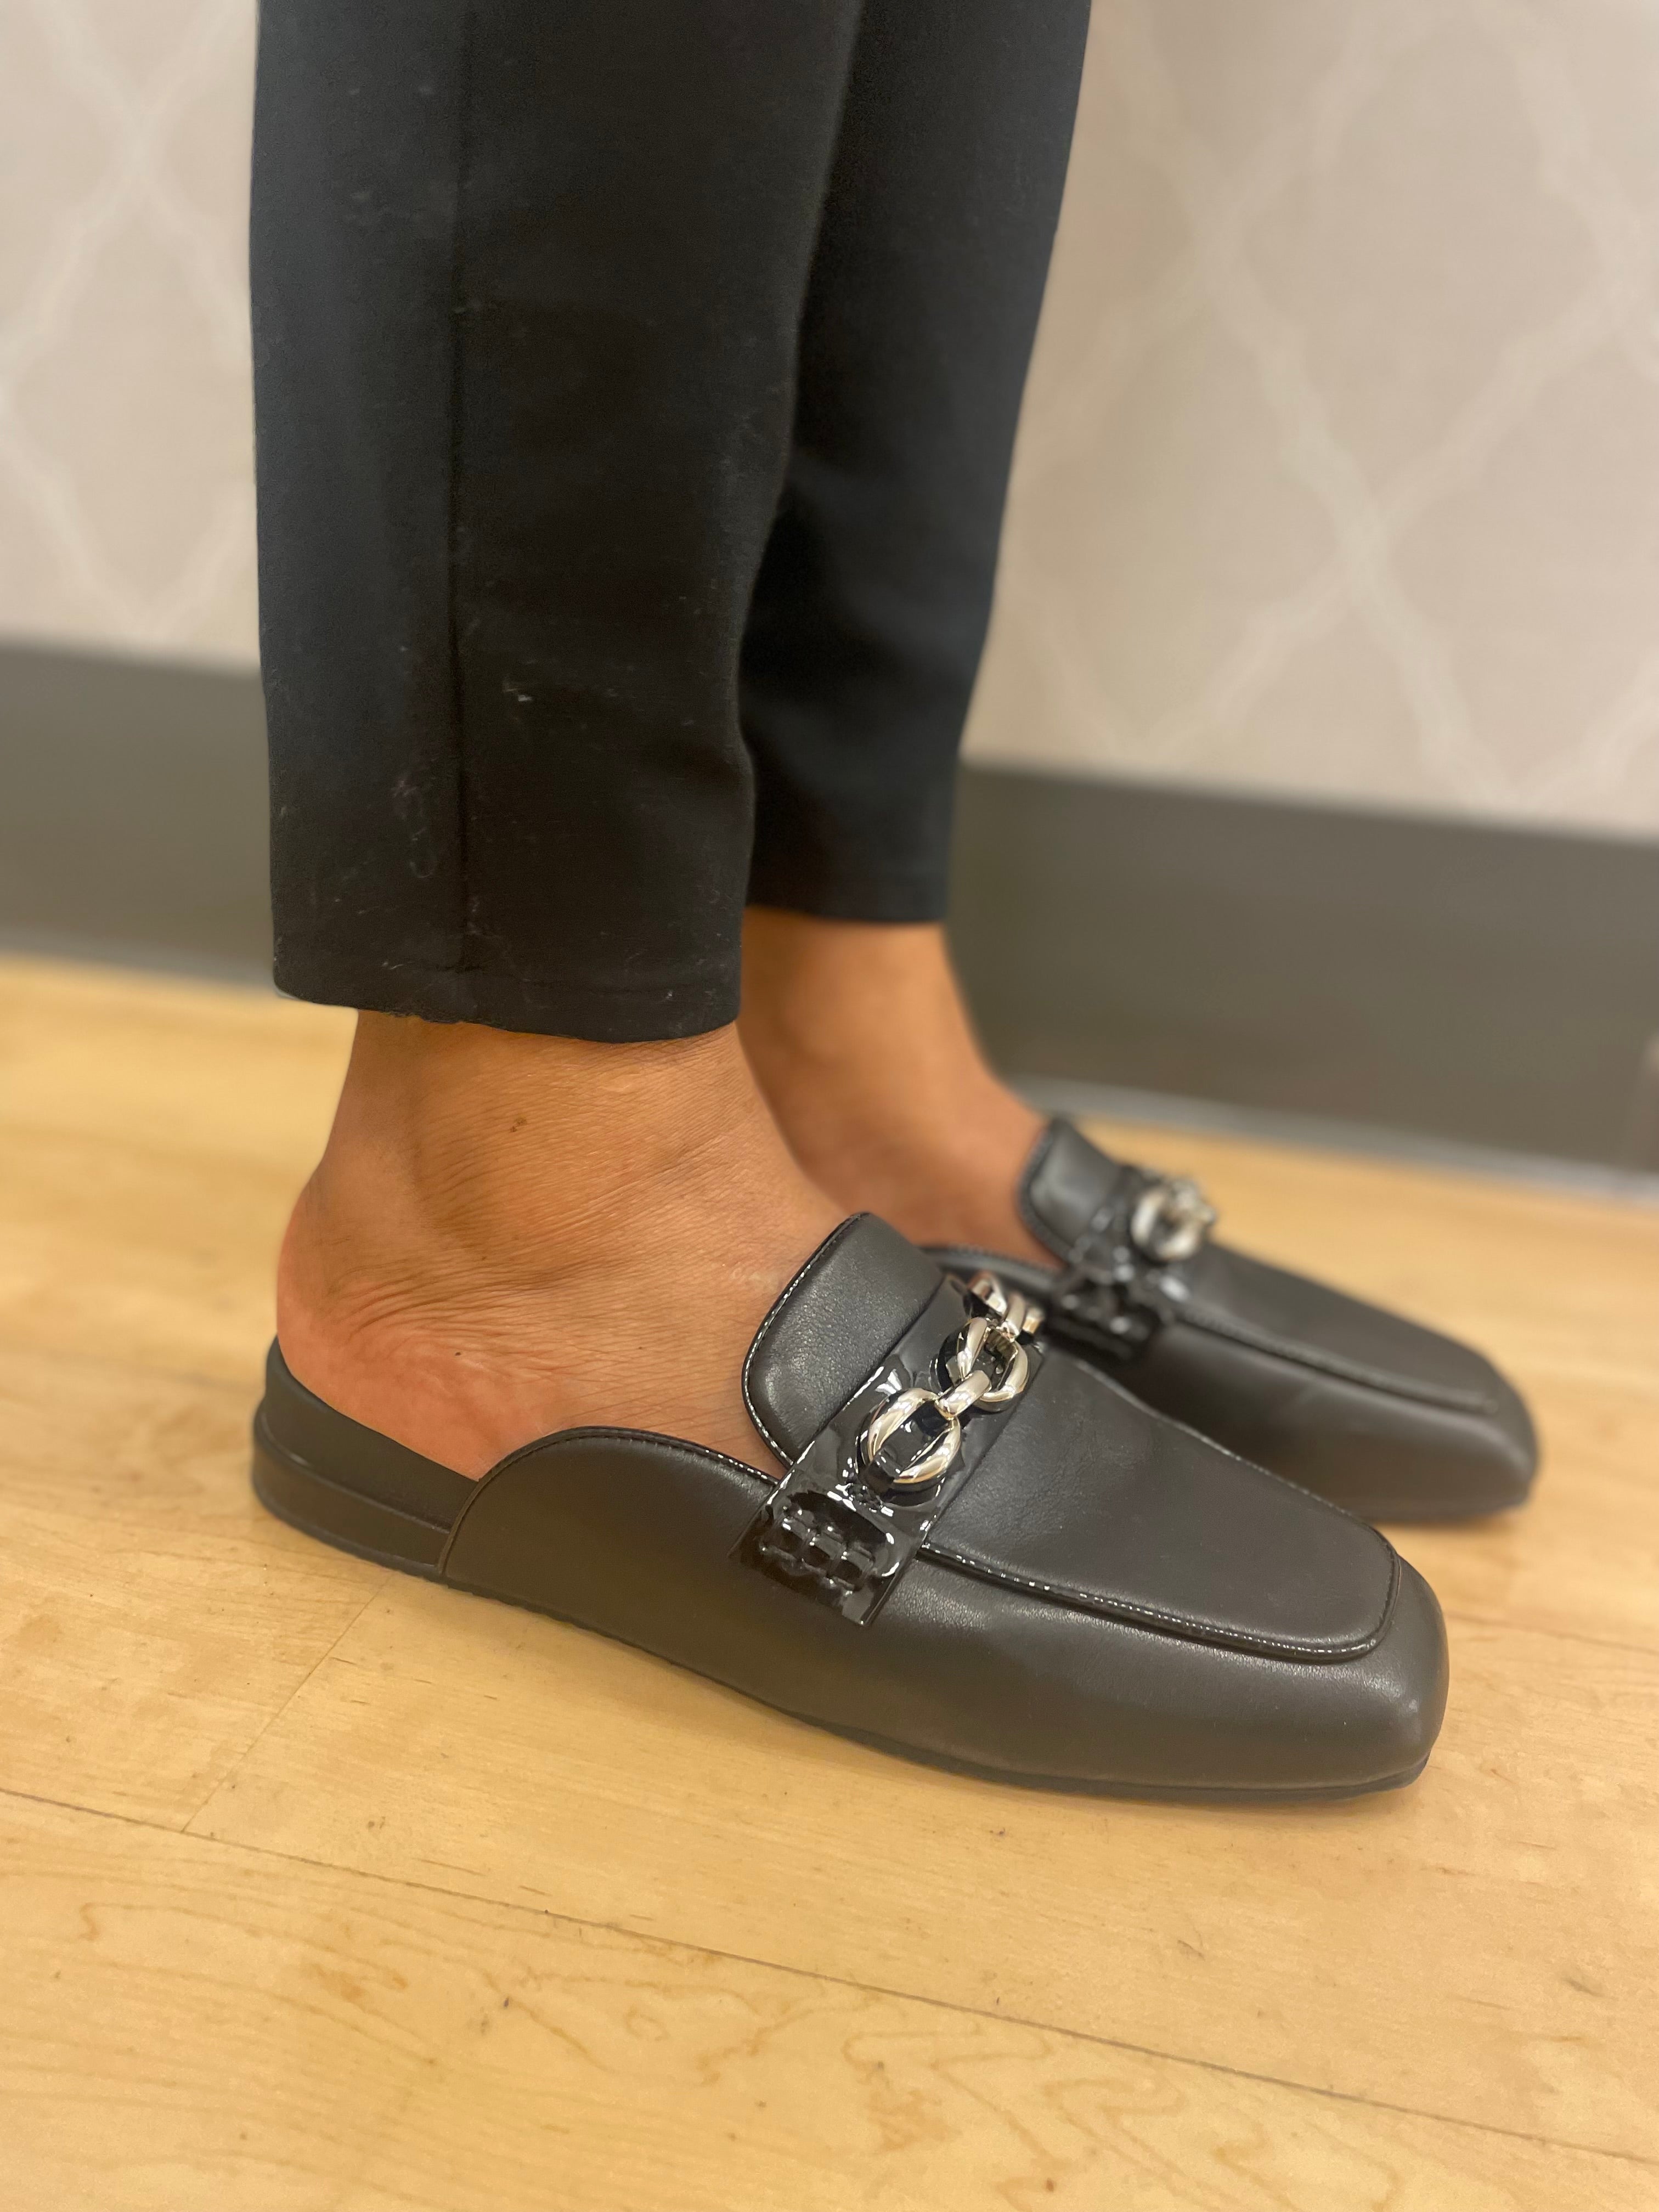 OLGA Two-Toned Black Square-Toed Chain Flat Mule Loafer